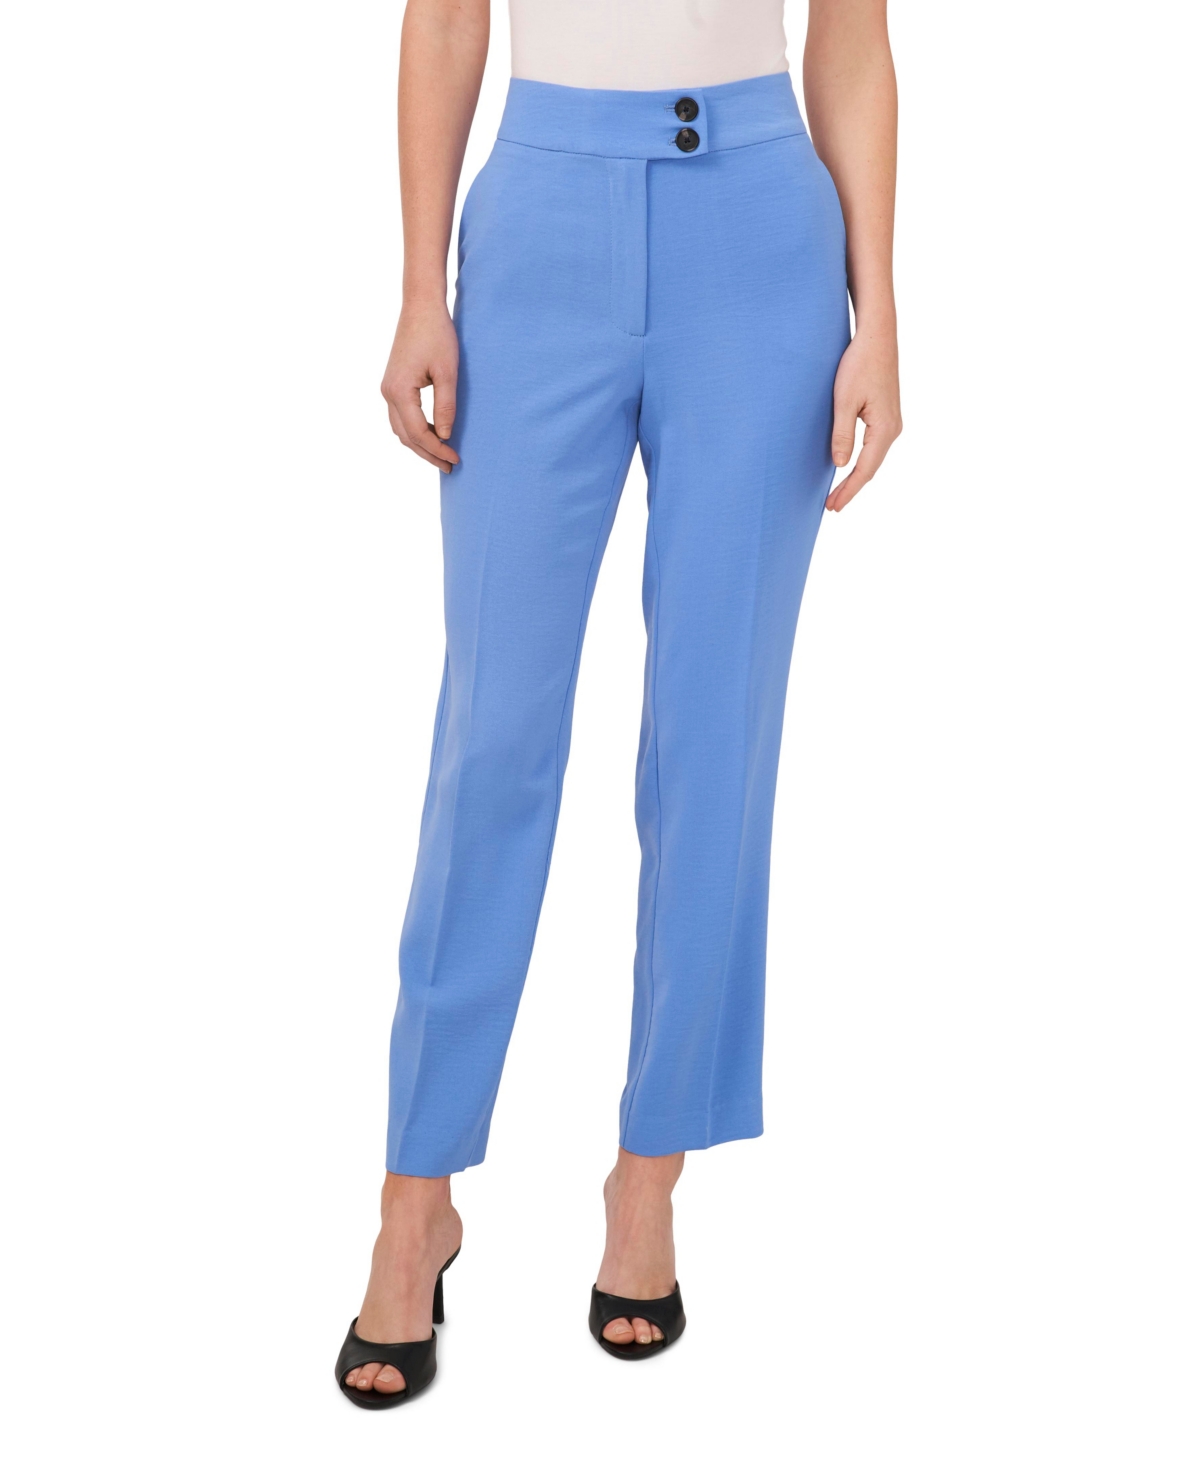 Shop Cece Women's Wear To Work Cropped Pants With Wide Waistband In Blue Jay